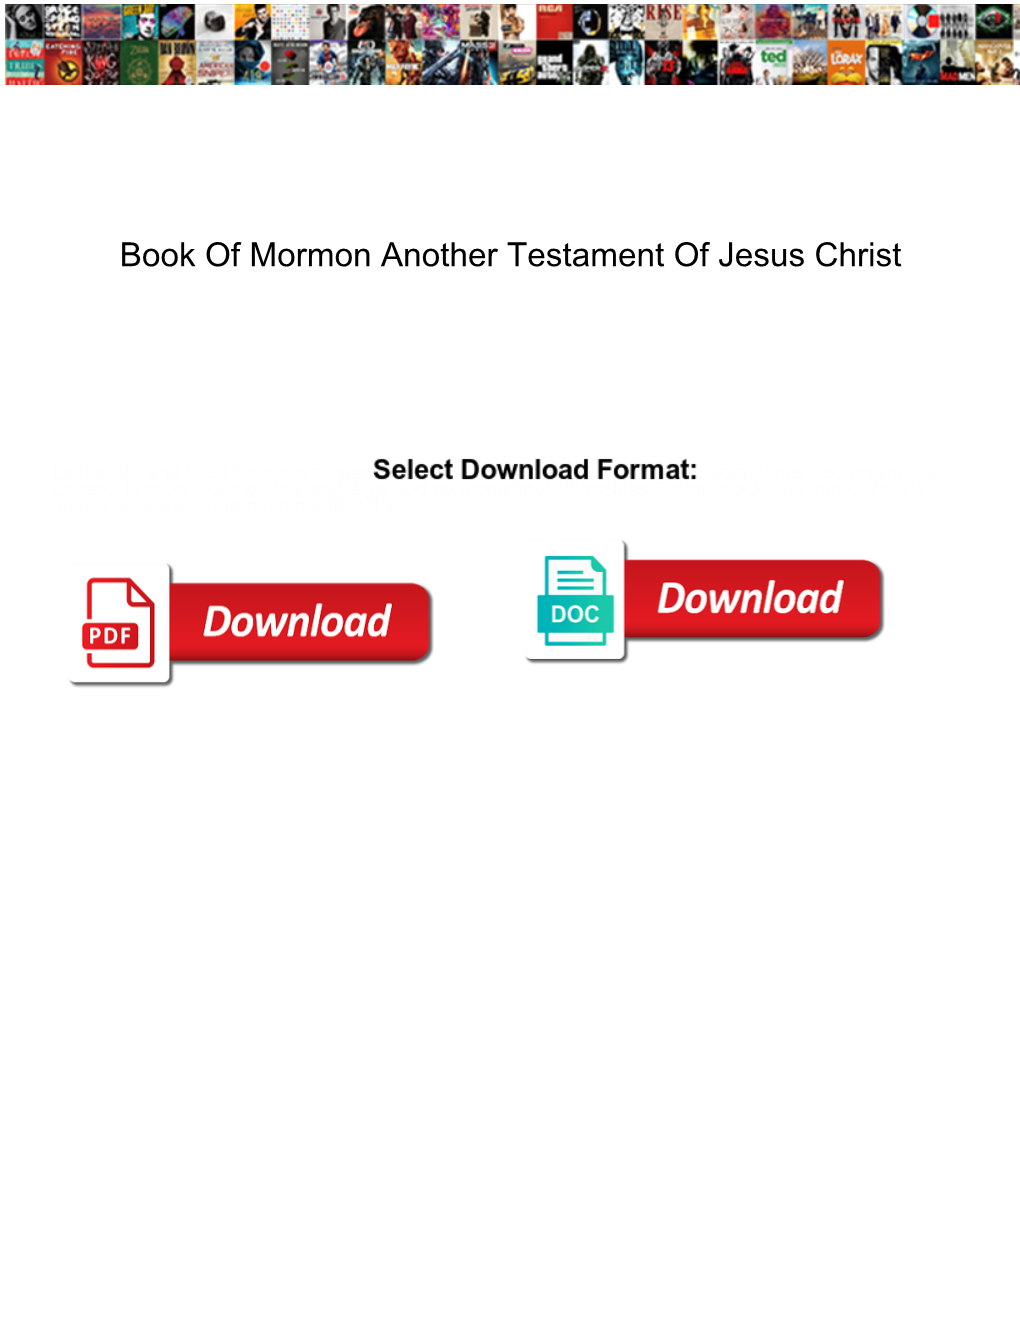 Book of Mormon Another Testament of Jesus Christ